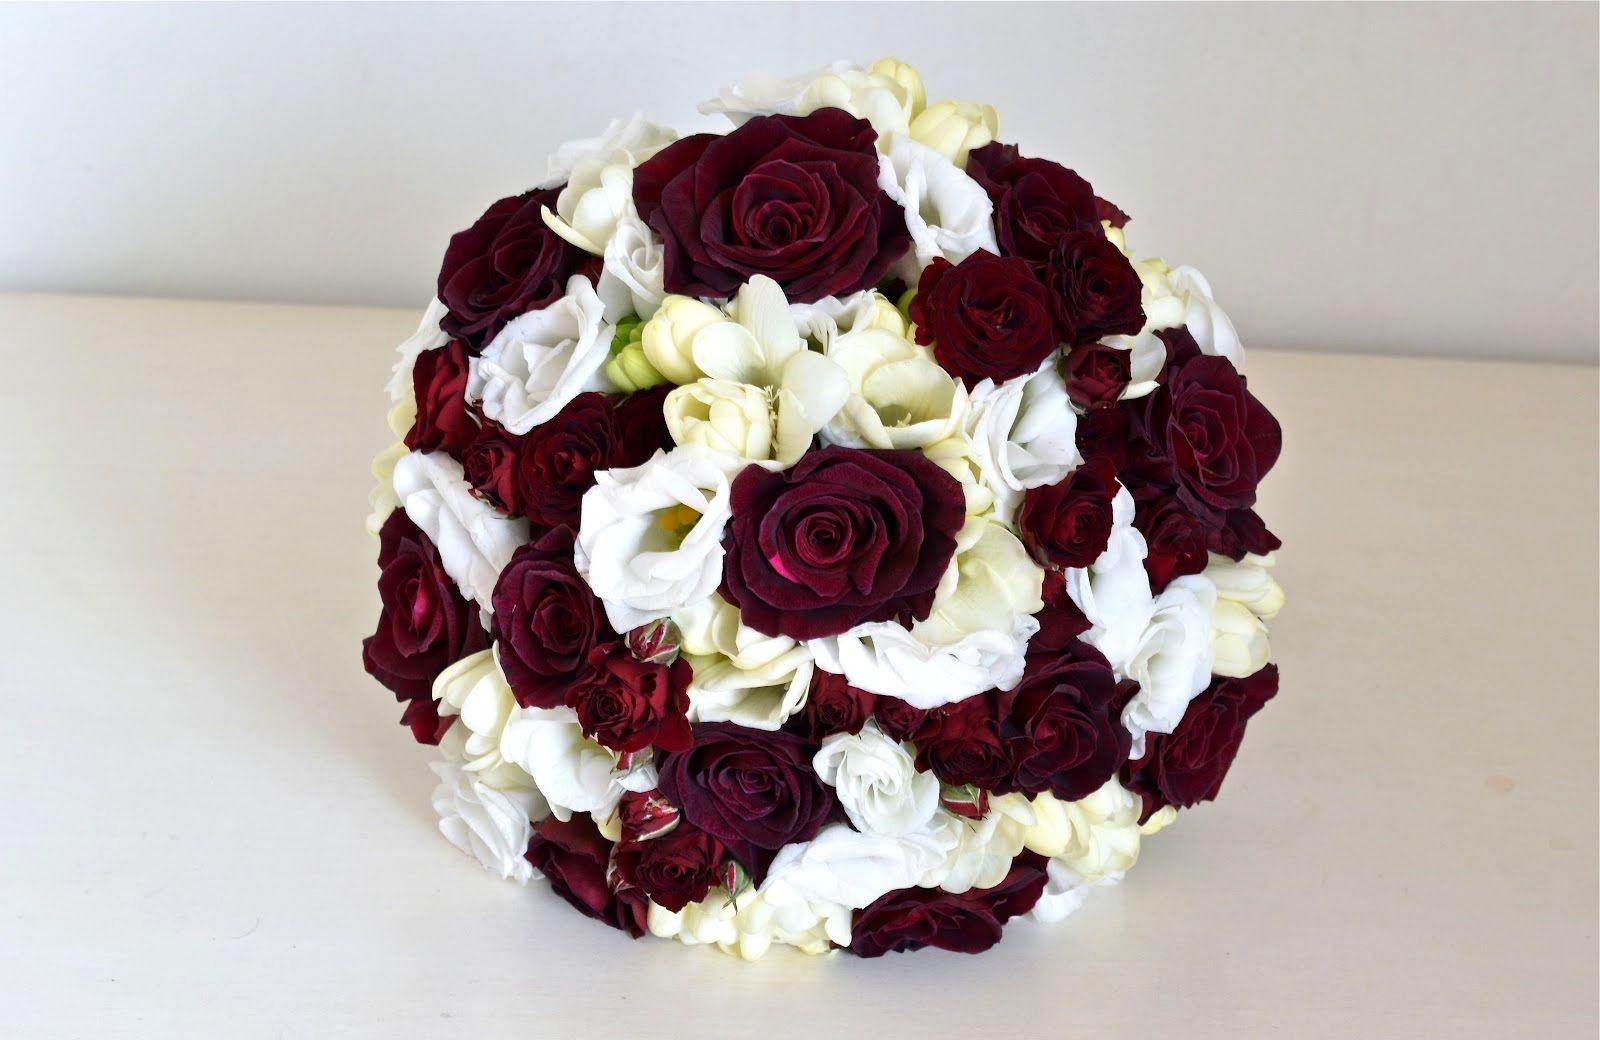 roses, flowers, bouquet, ball, lisianthus russell, lisiantus russell, freesia